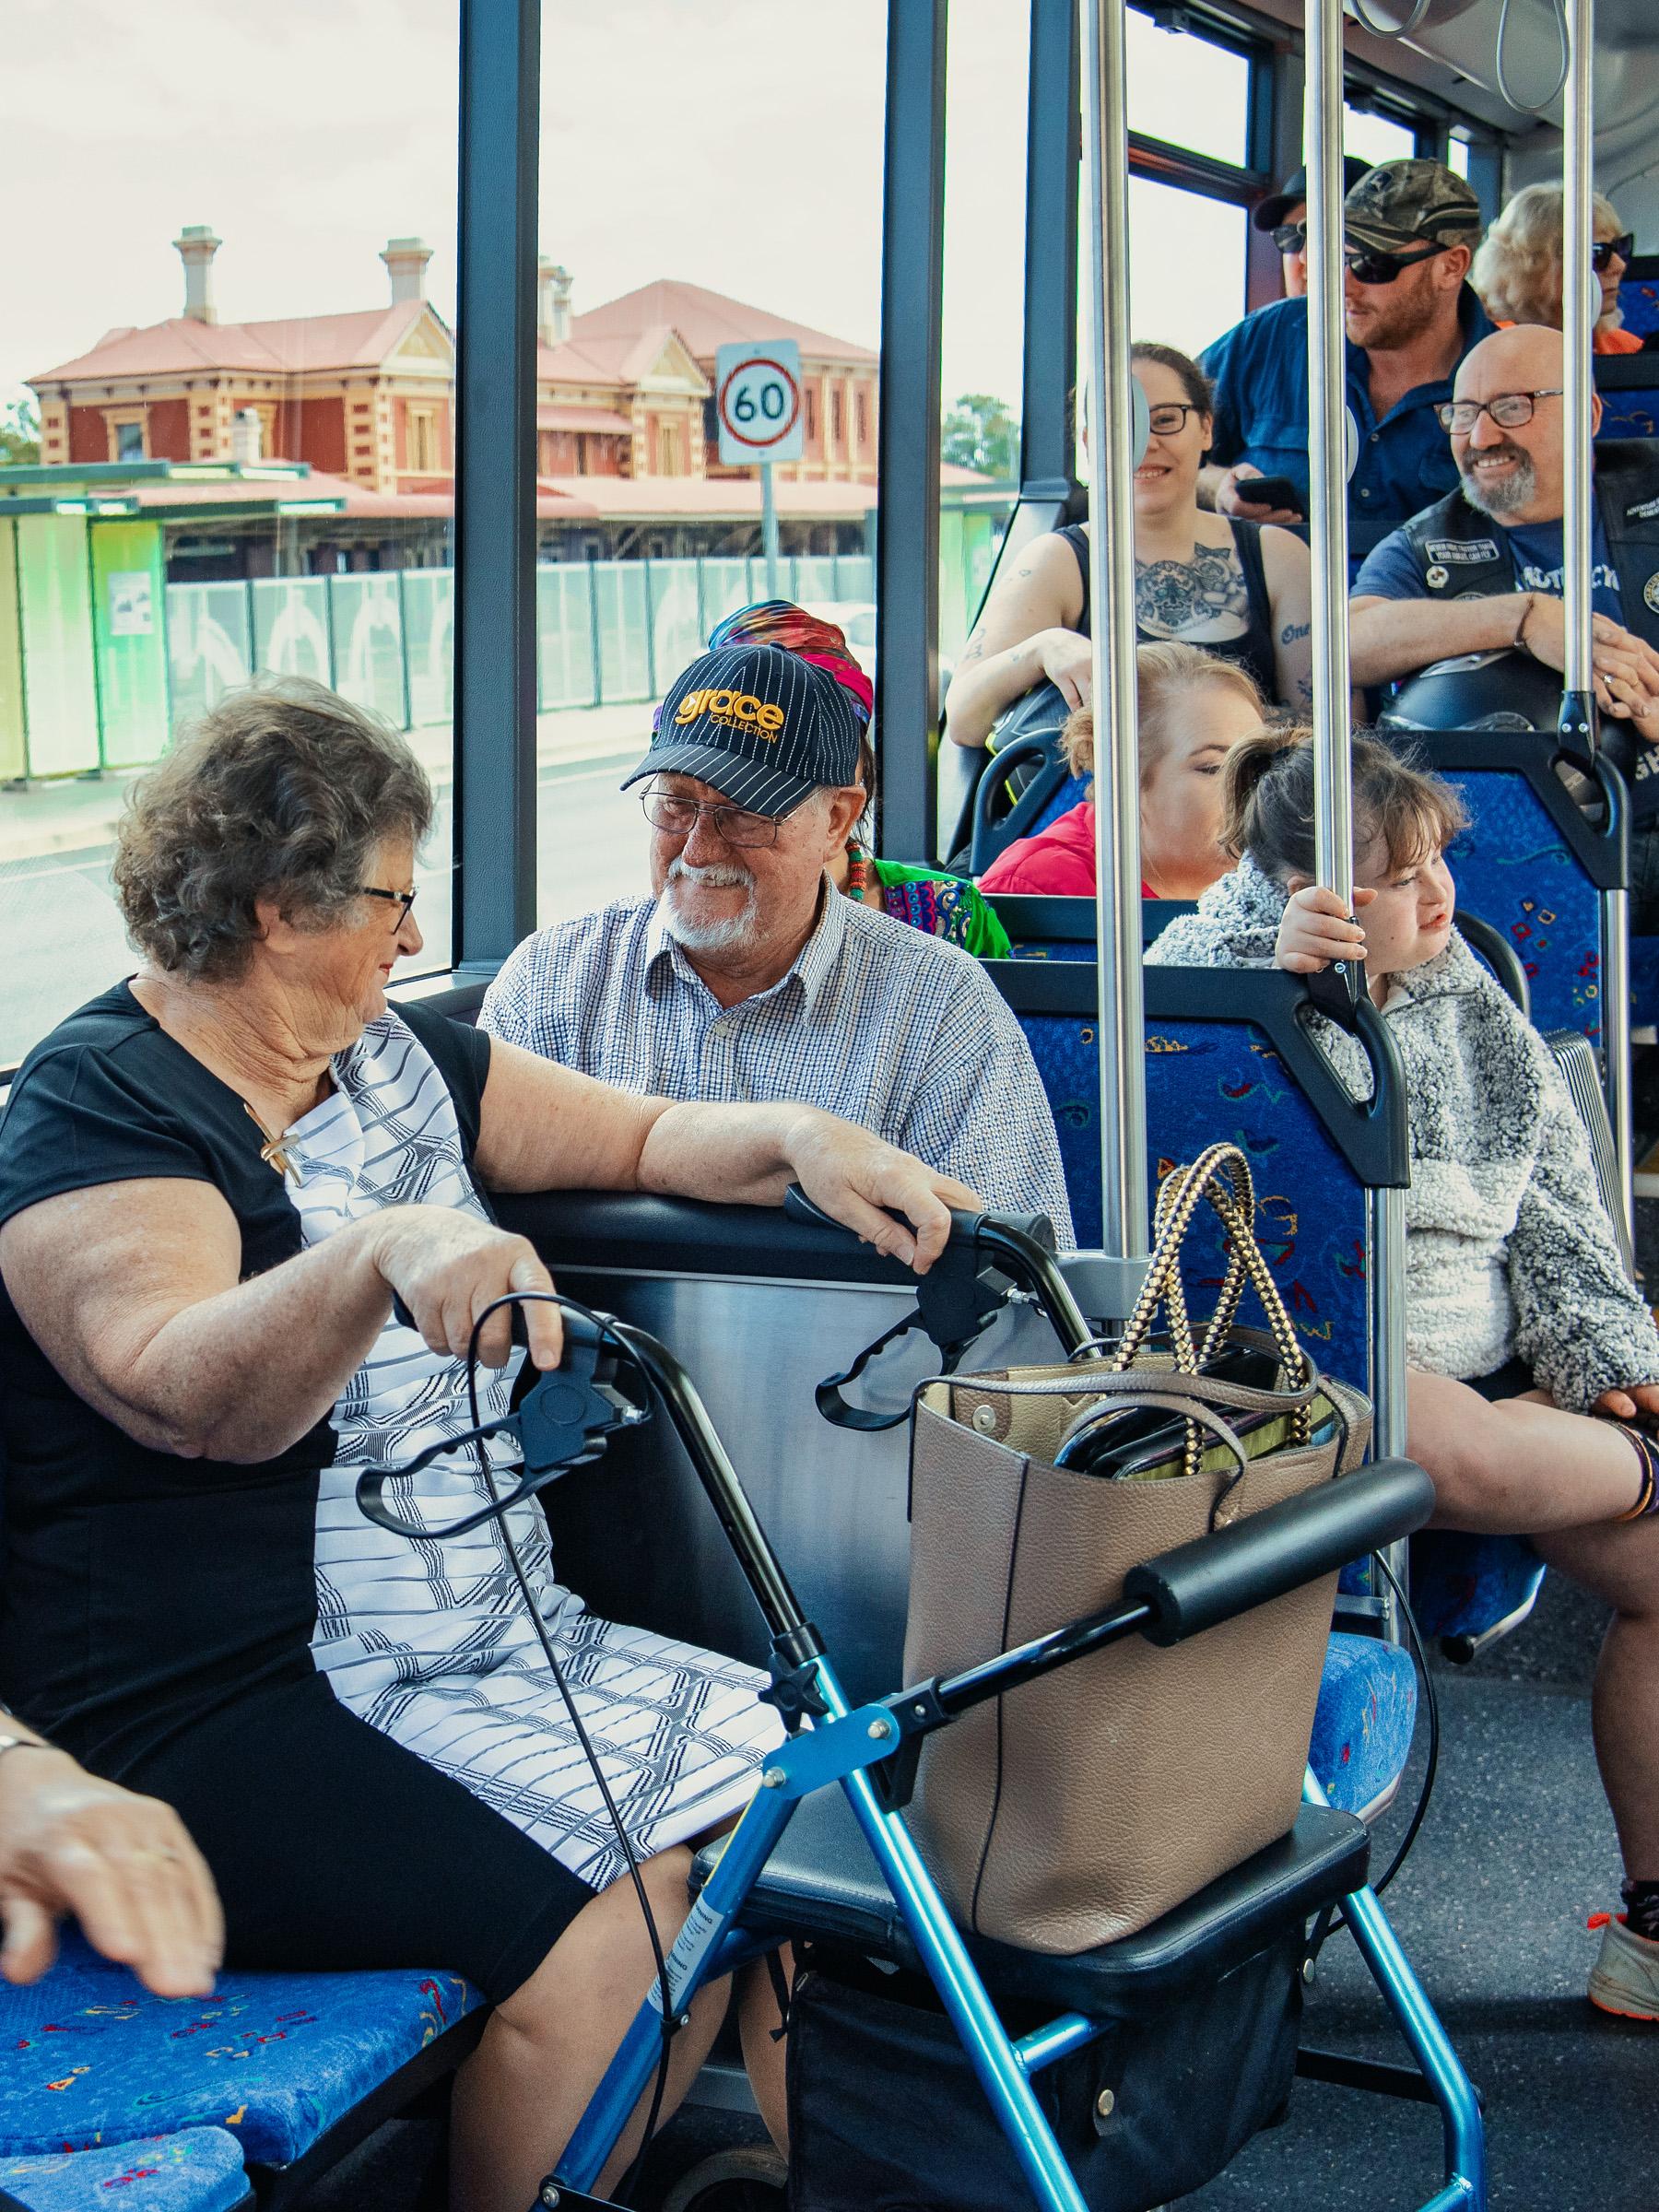 Bus passenger sitting in priority seating section with a mobility walker, smiling and talking to another passenger